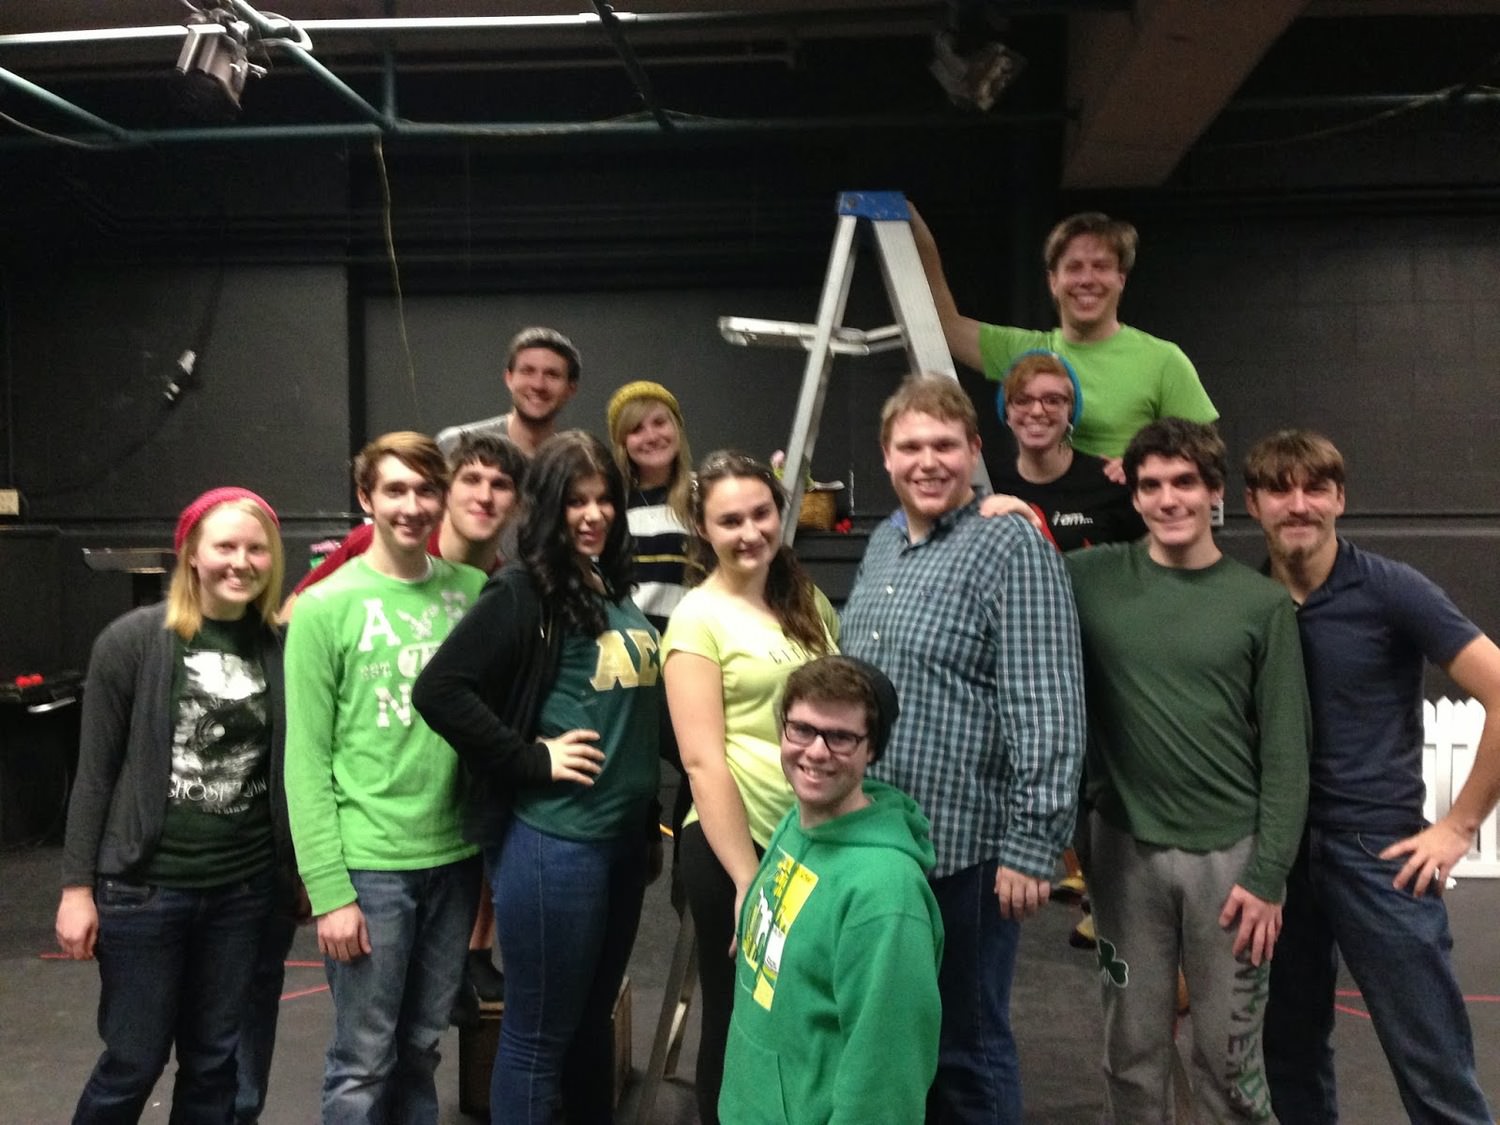 The whole cast and crew wearing green. 1